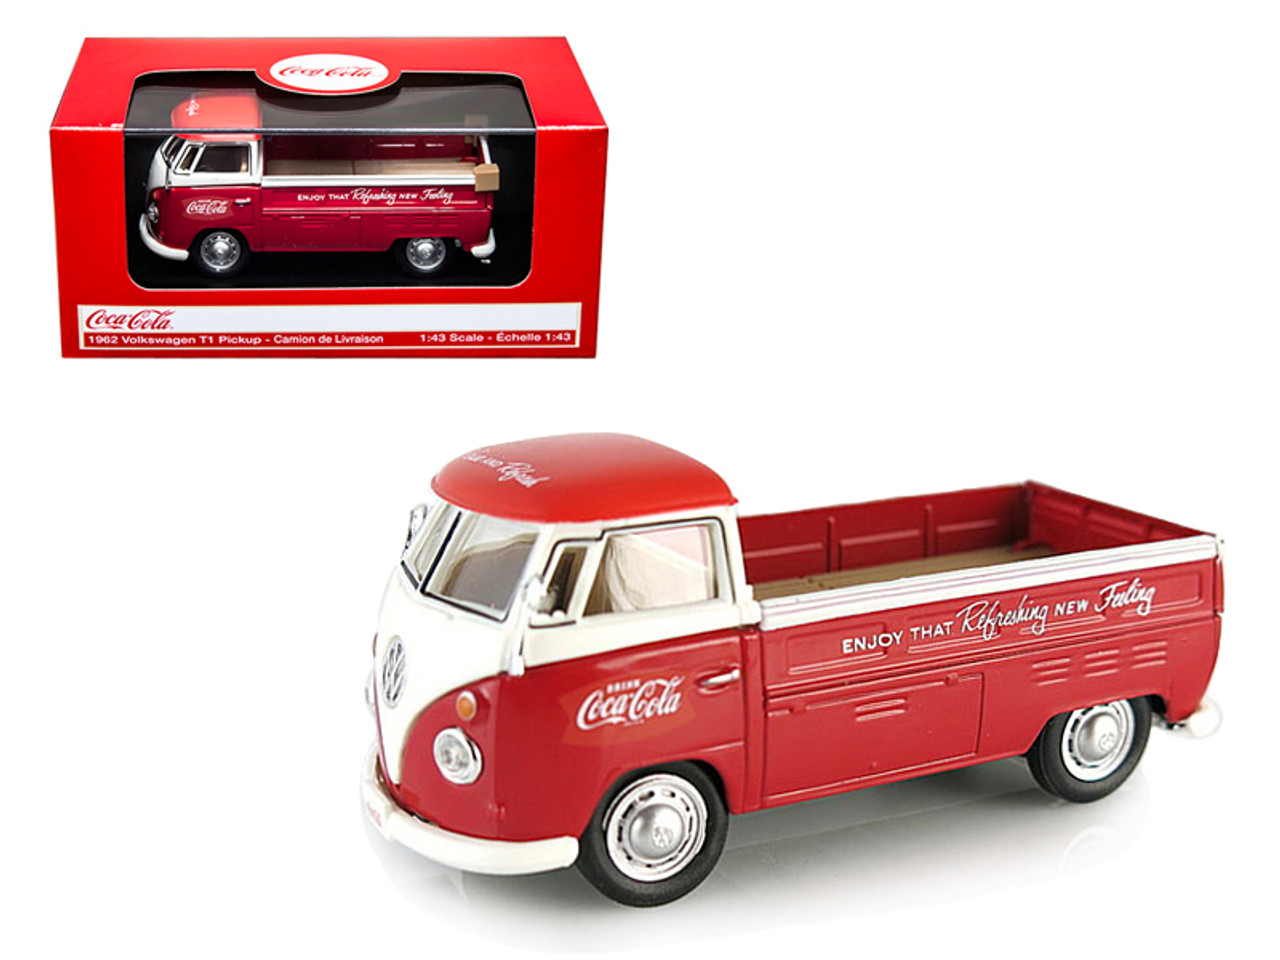 1962 Volkswagen T1 Pickup Truck "Coca-Cola" Red 1/43 Diecast Model Car by Motorcity Classics